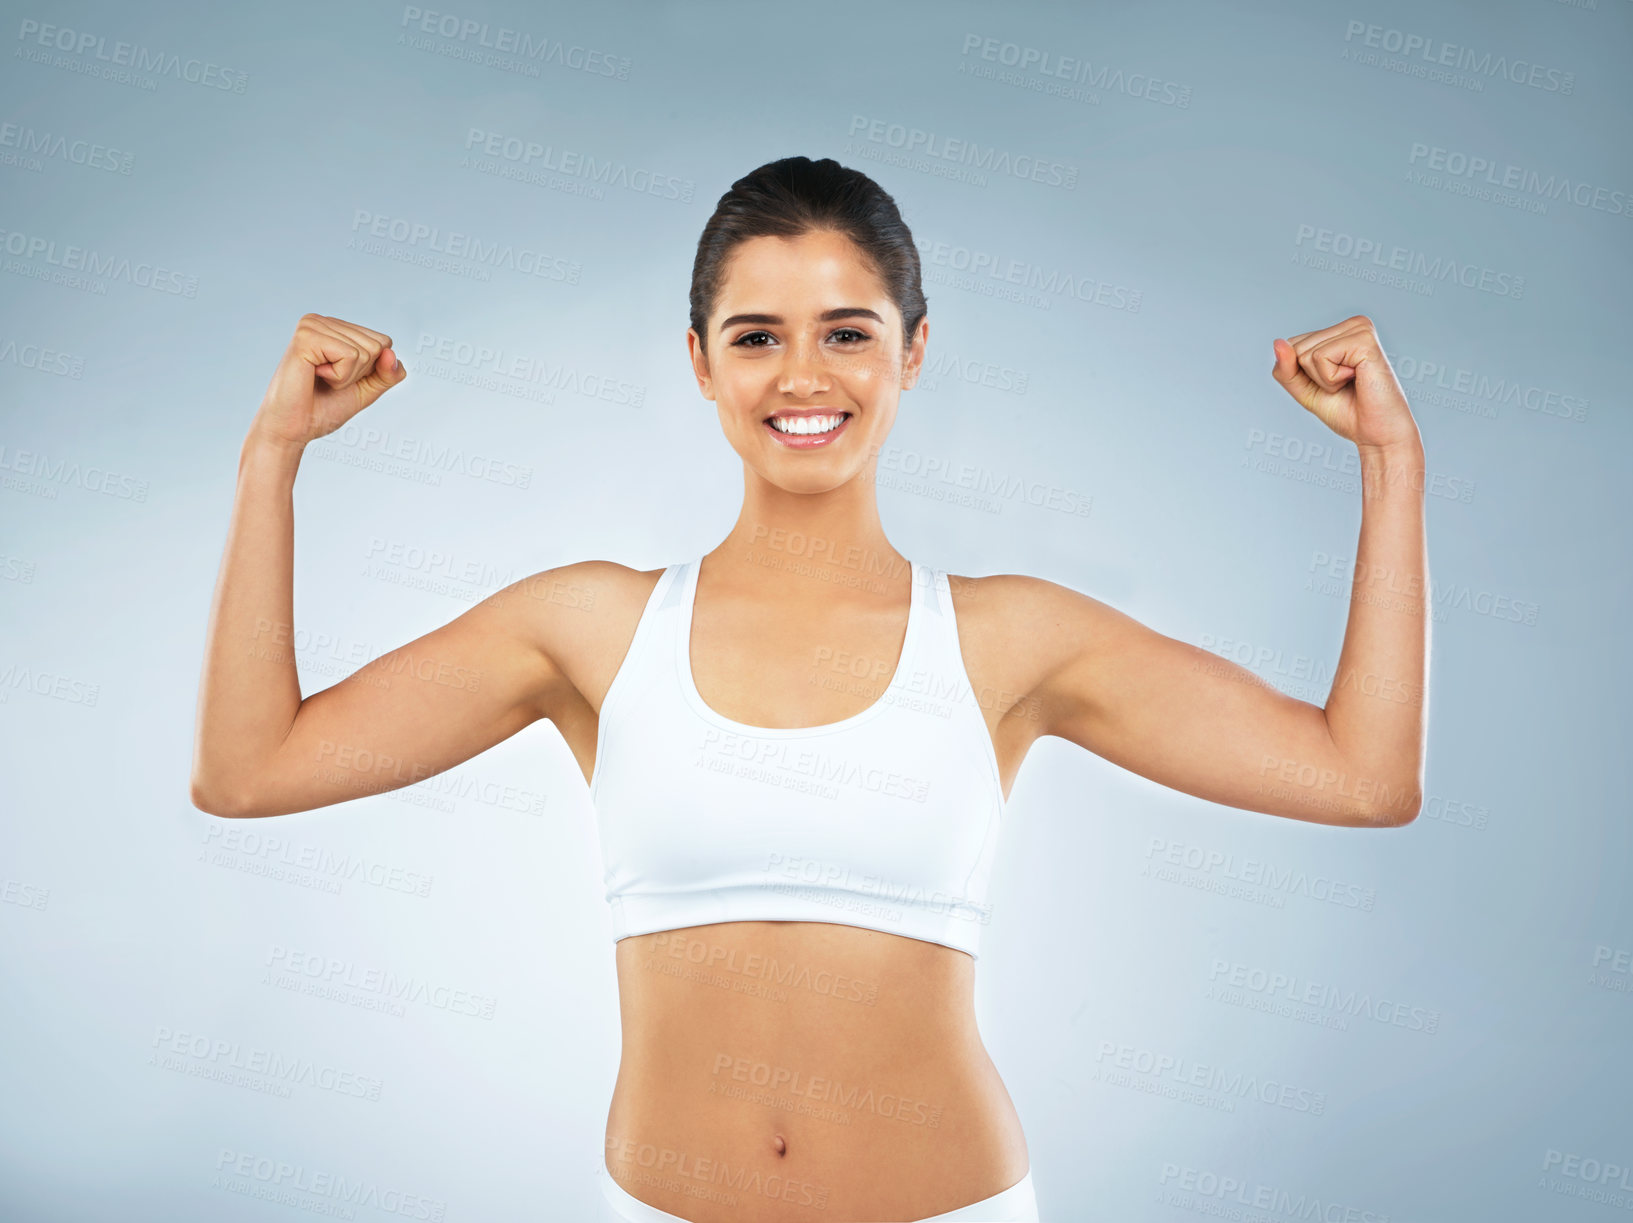 Buy stock photo Studio portrait of an attractive young woman flexing her muscles against a grey background